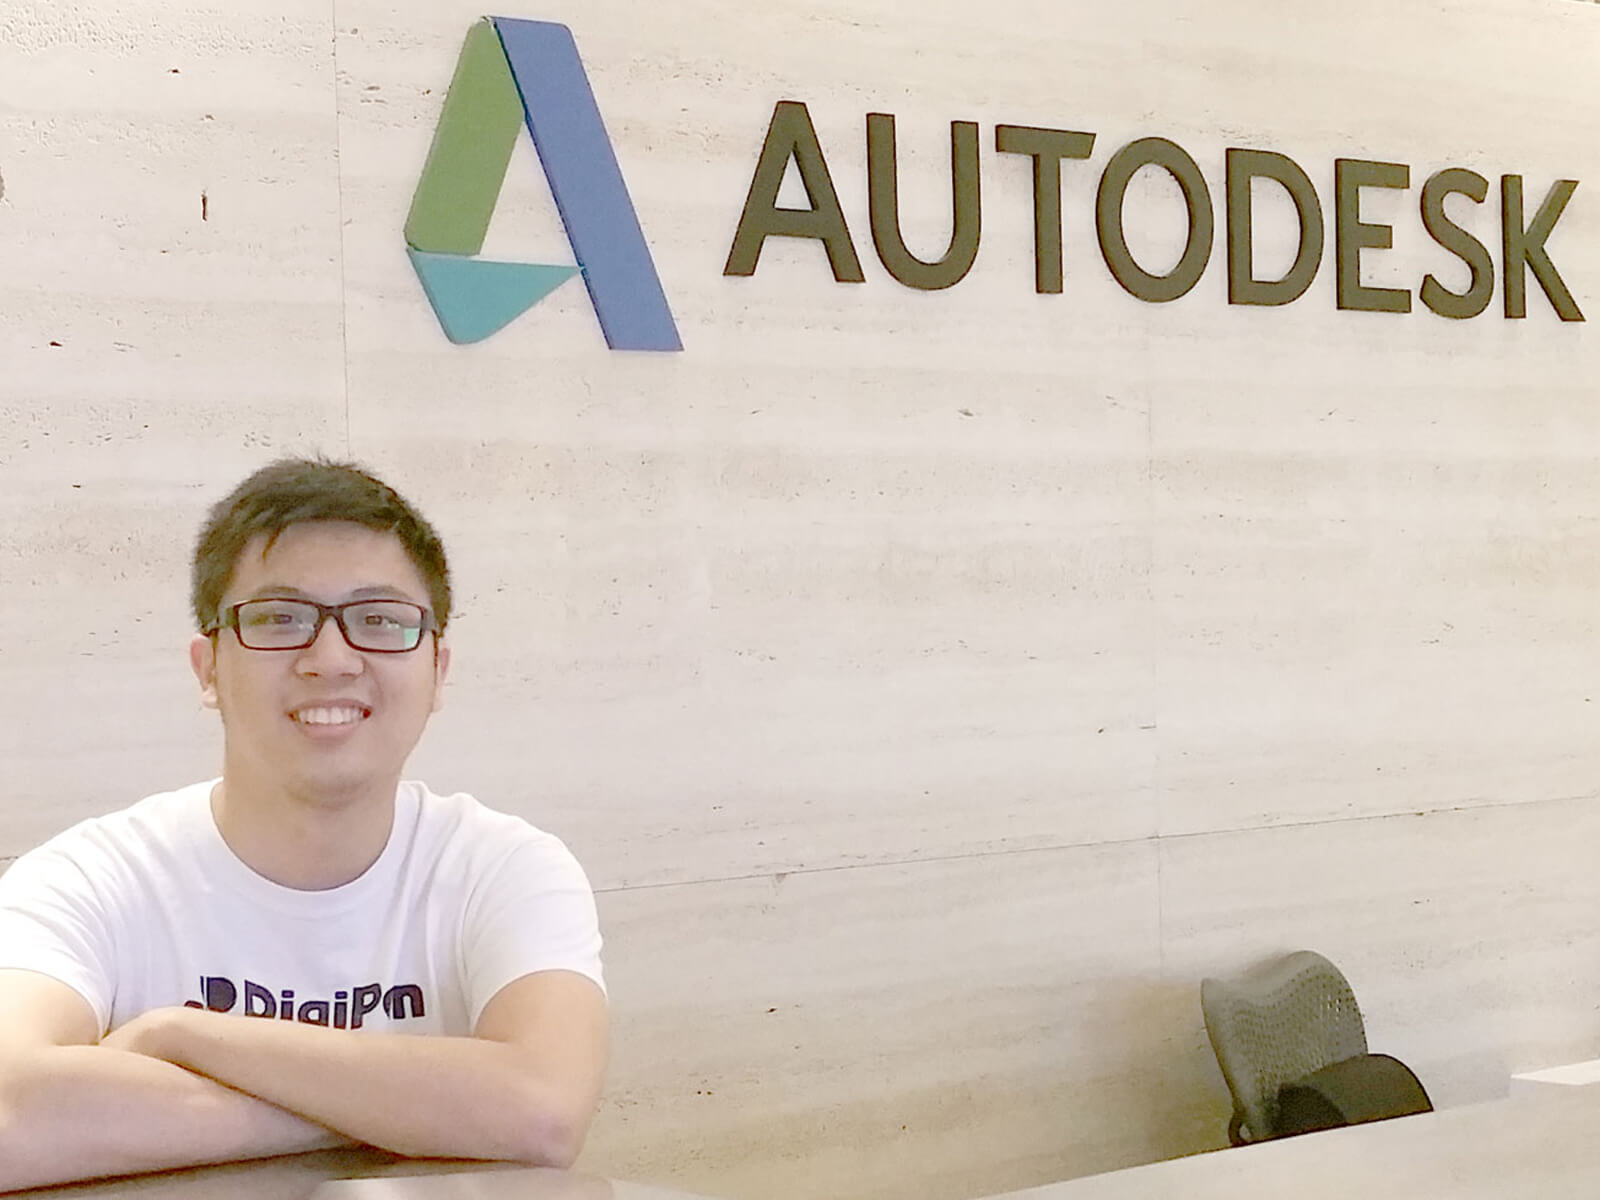 Graduate Julian Teh stands behind a counter with the Autodesk logo on a wall behind him